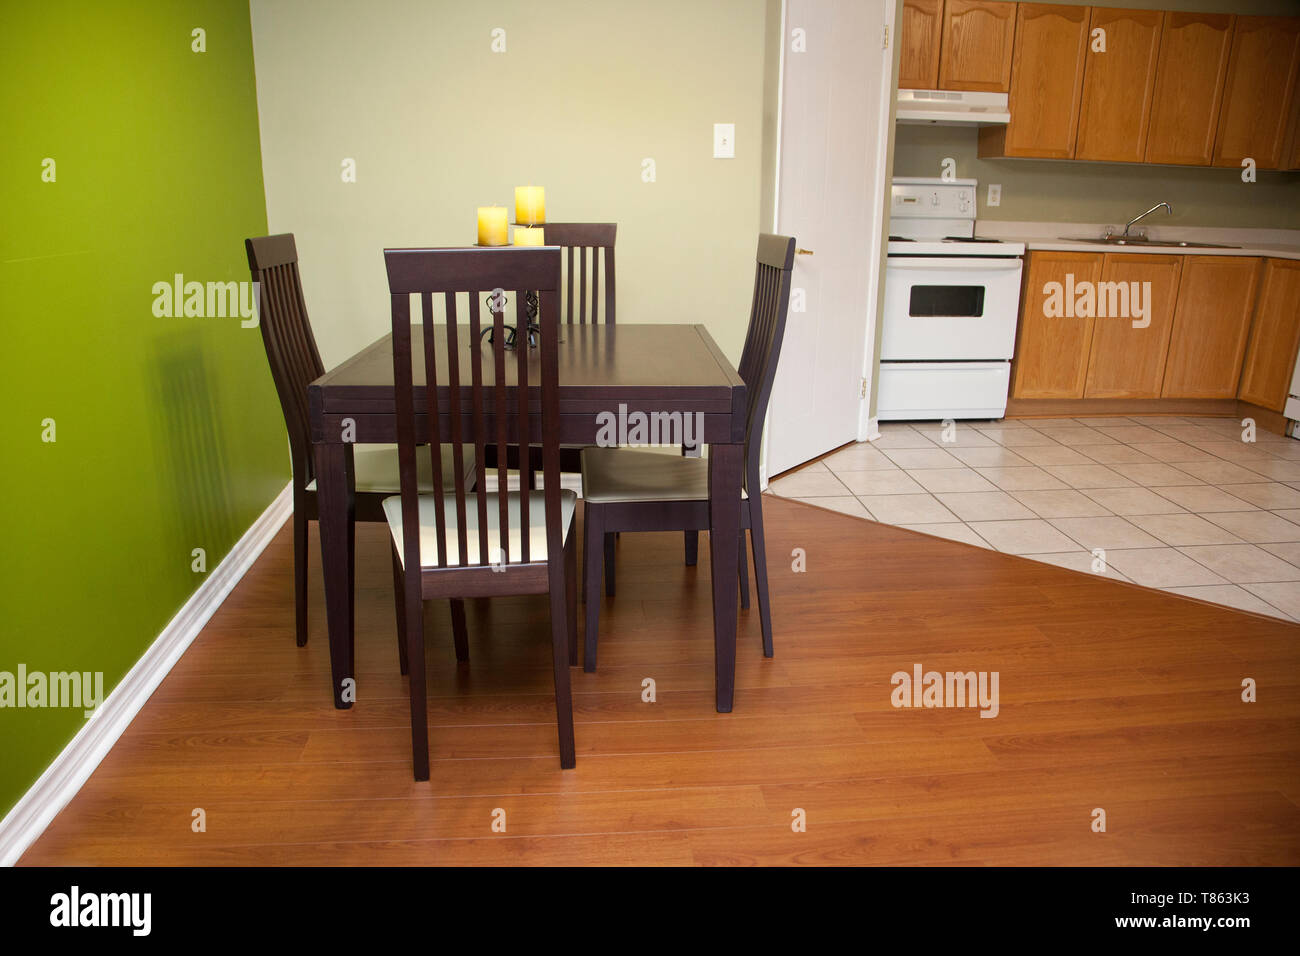 Eating area with kitchen stove in the background Stock Photo